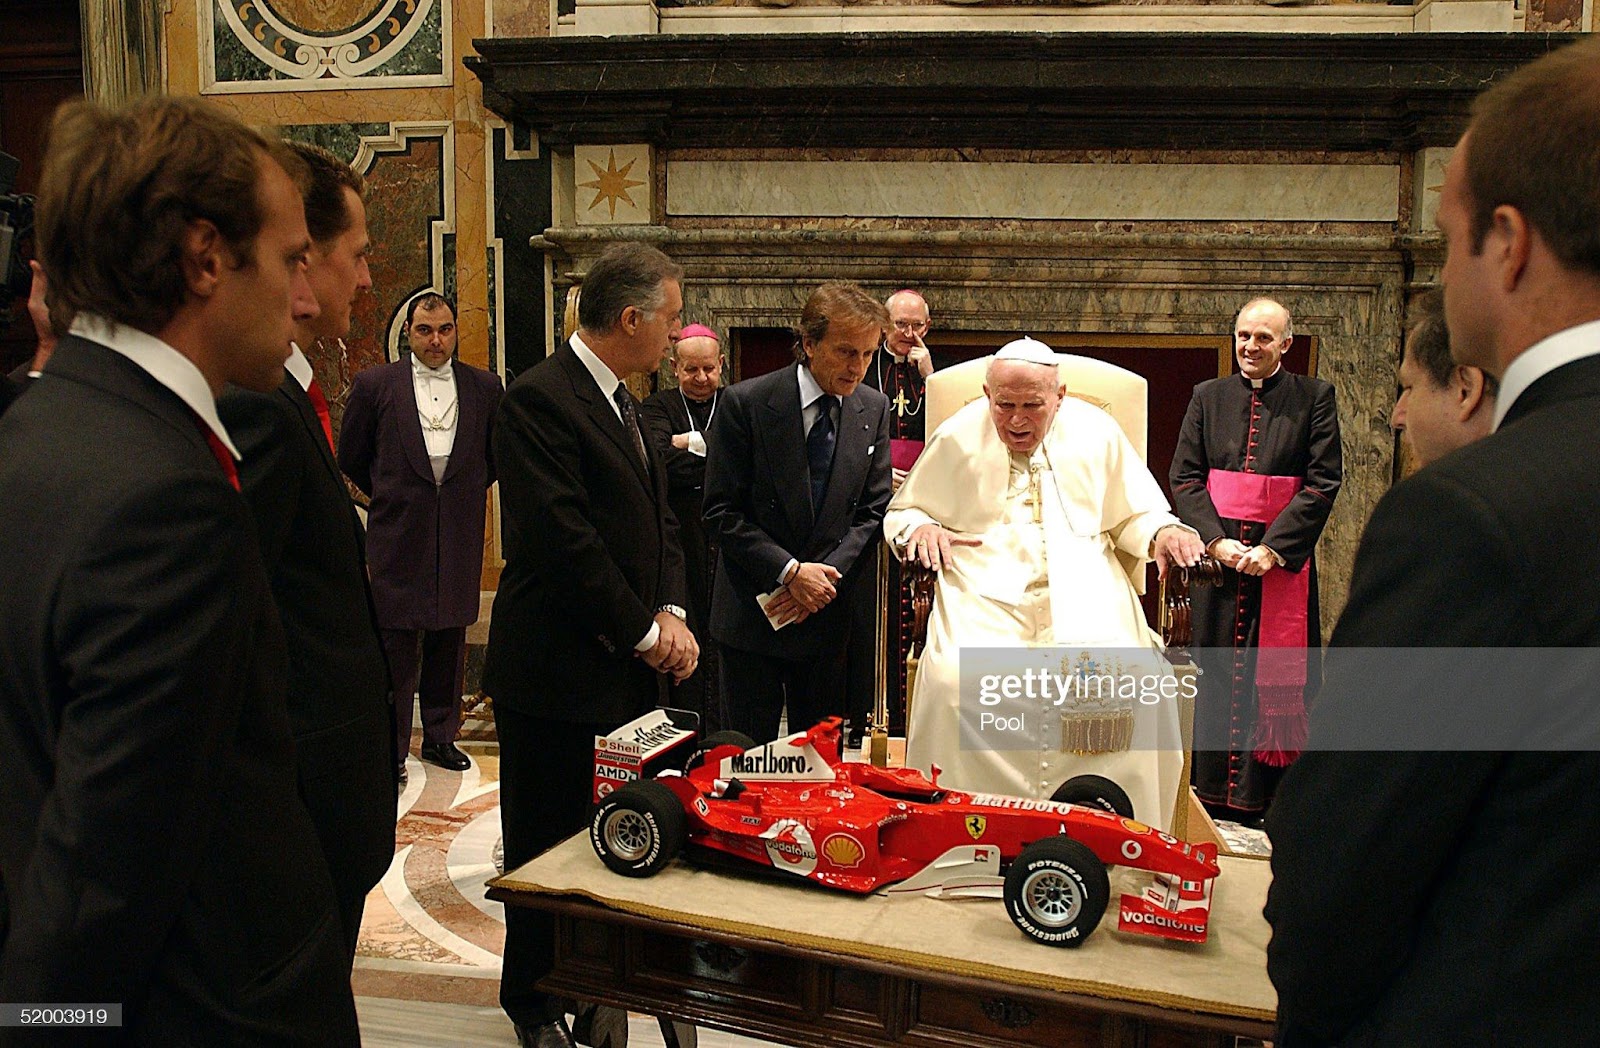 Pope John Paul II receives as a gift from Ferrari President Luca Cordero di Montezemolo, Michael Schumacher, Brazilian teammate Rubens Barrichello, Ferrari managing director, F1 team boss Jean Todt and mechanics a 1:5 scale model of the car that won Ferrari both the championship and constructor title in 2004 during a meeting at the Clementina Hall, January 17, 2005, in Vatican City.